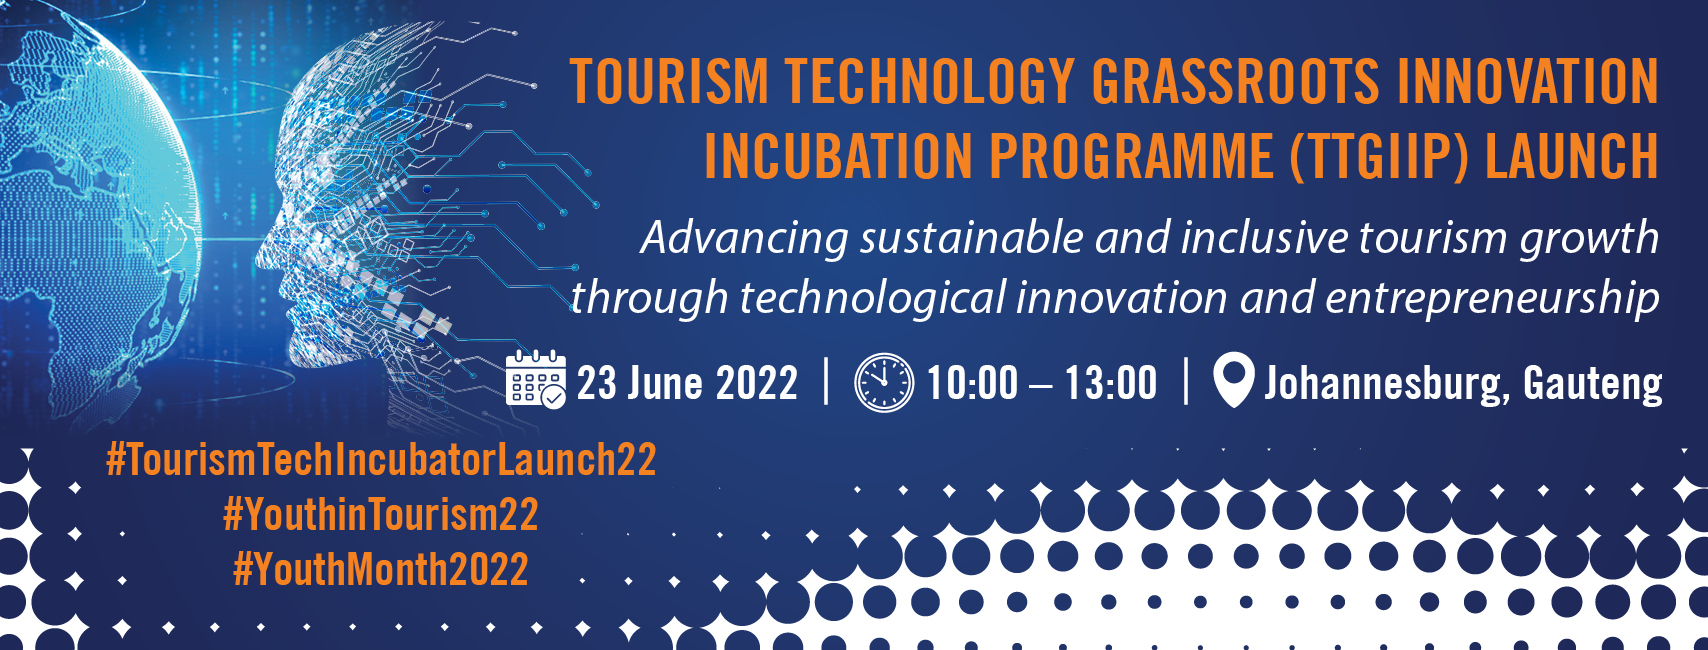 Speech by Honourable, Fish Mahlalela, Deputy Minister of Tourism at the launch of Tourism Technology Grassroots Innovation and I